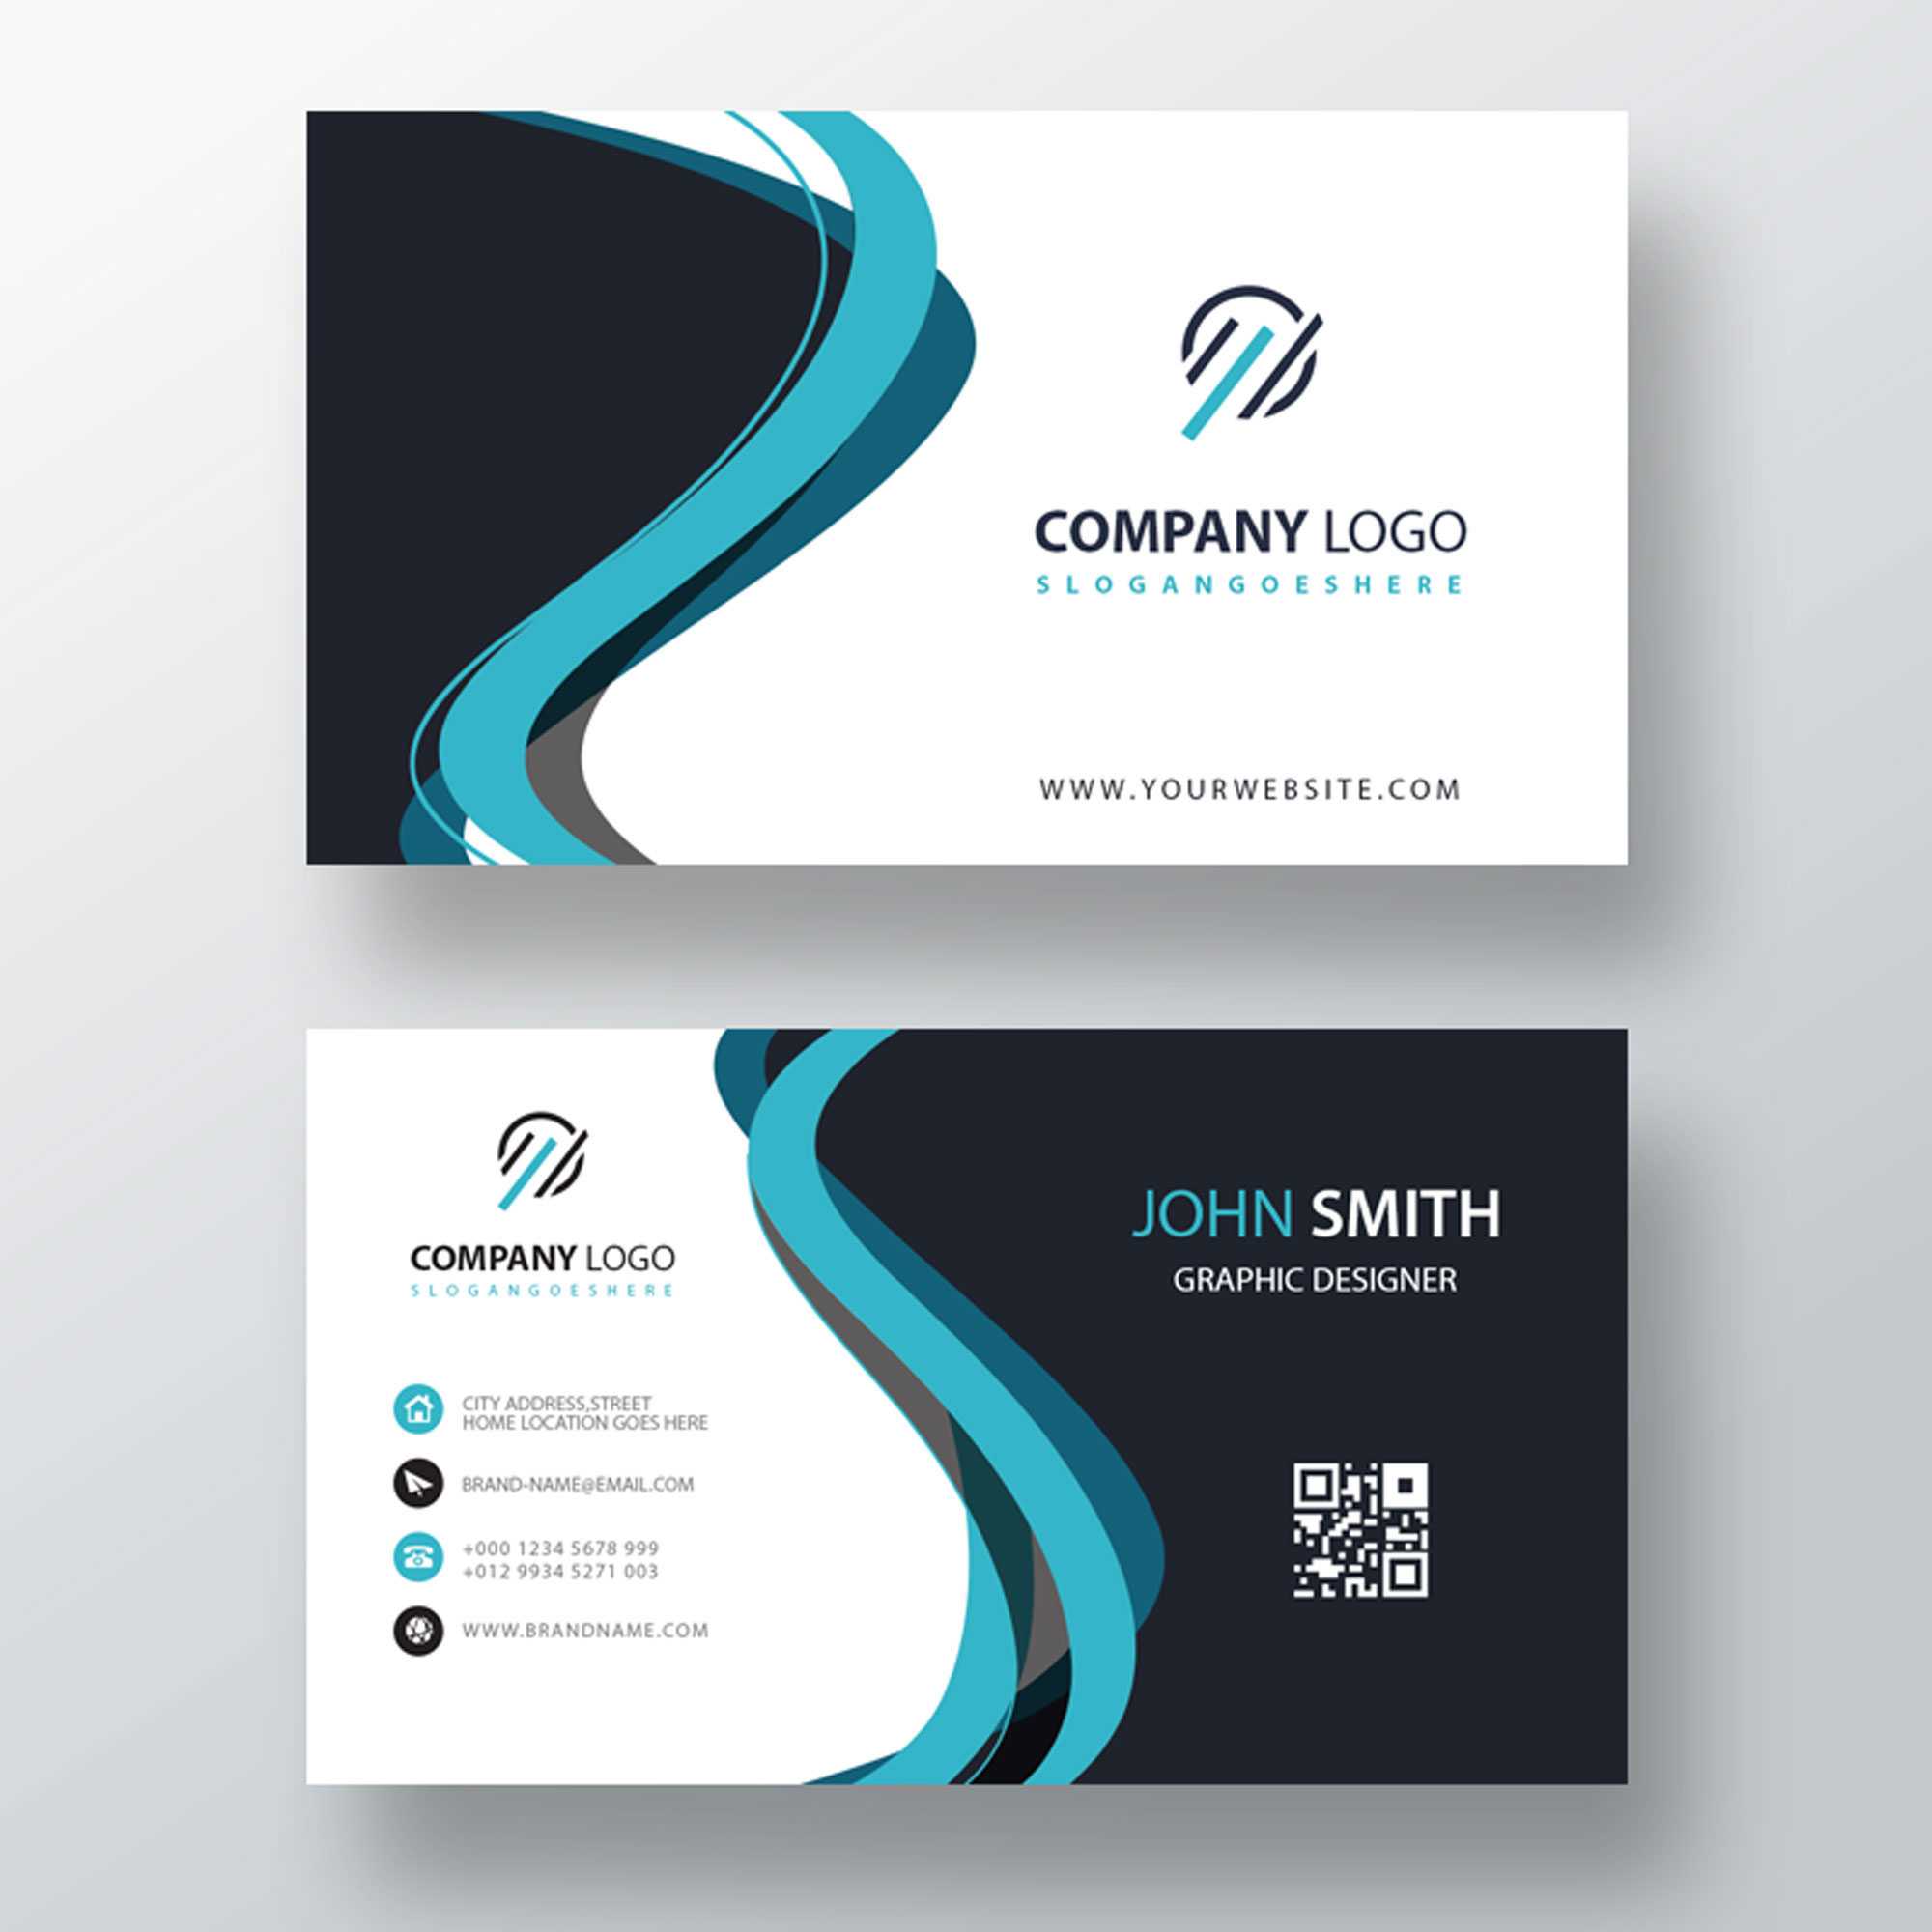 Classic Company Visiting Card Template | Free Customize Inside Buisness Card Template